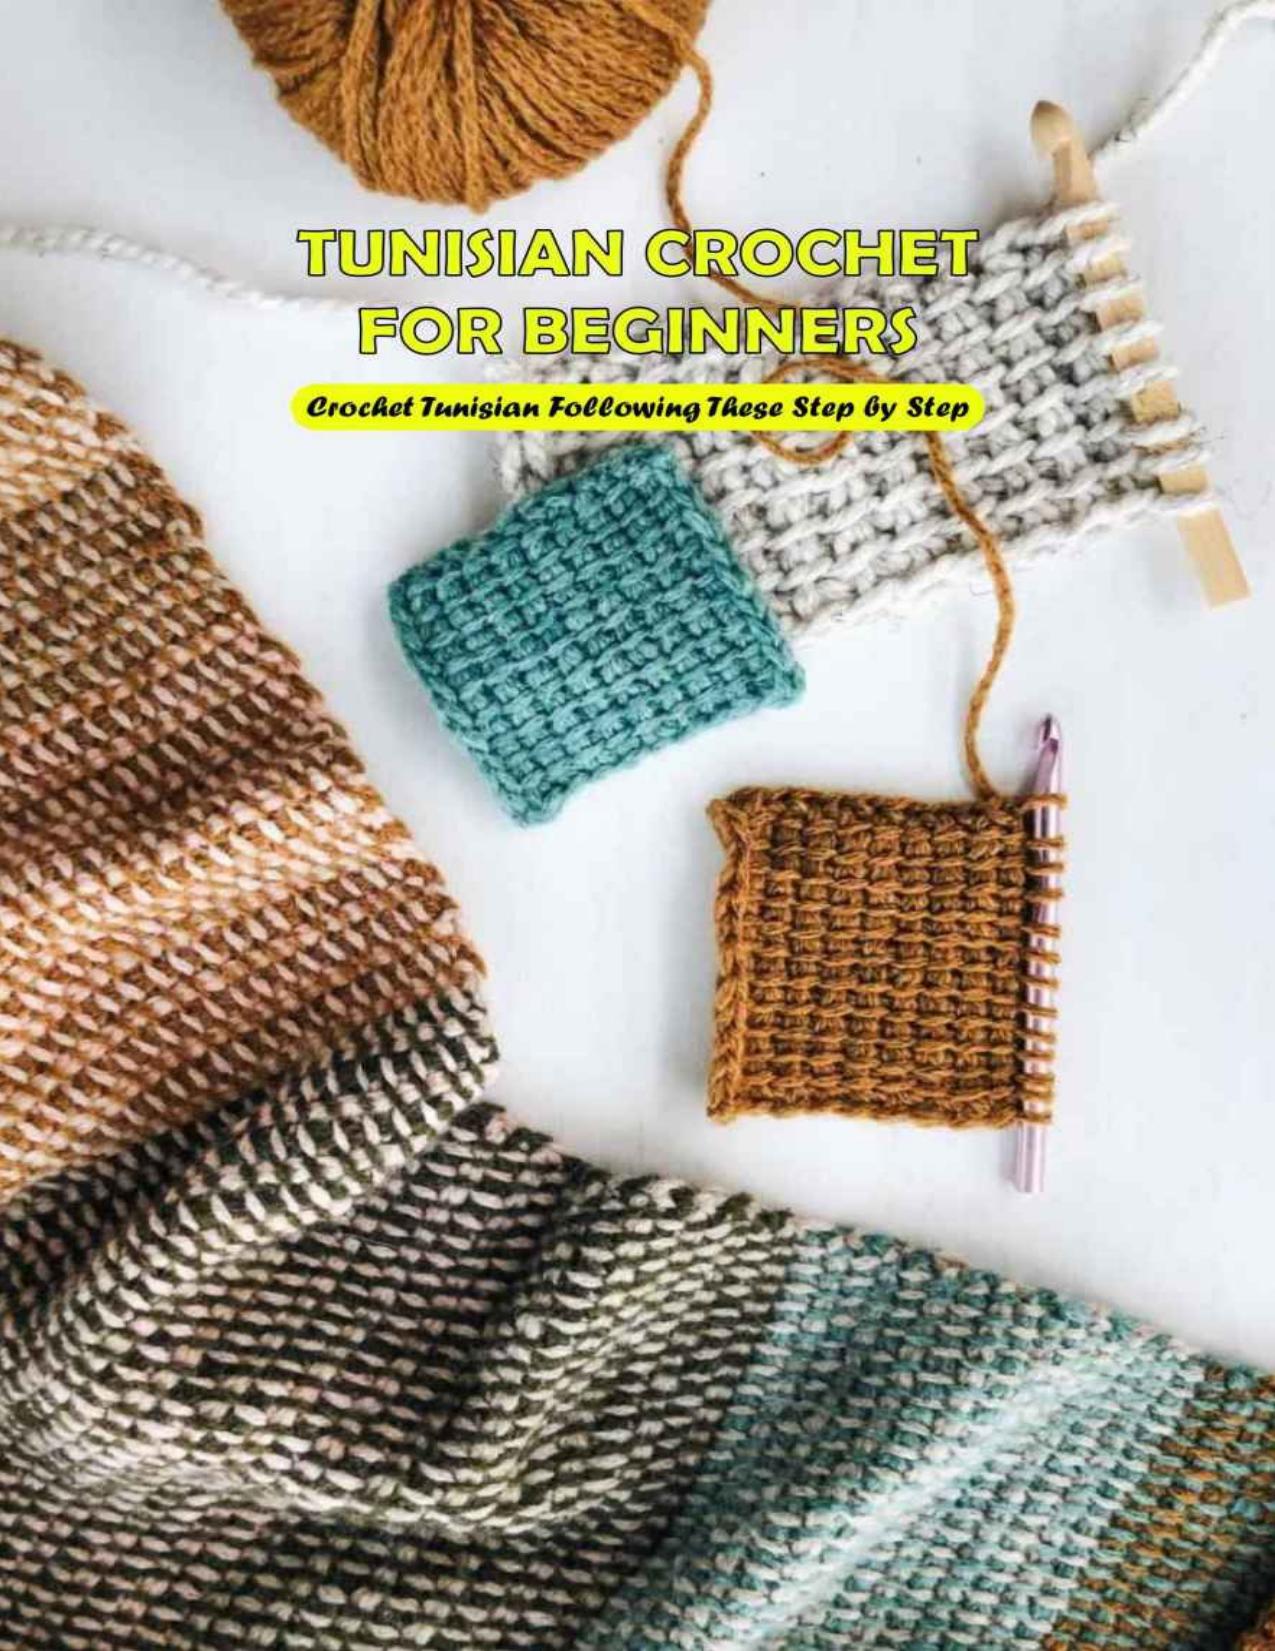 Tunisian Crochet for Beginners: Crochet Tunisian Following These Step by Step: Tunisian Crochet Guide Book by DEAN JACOB